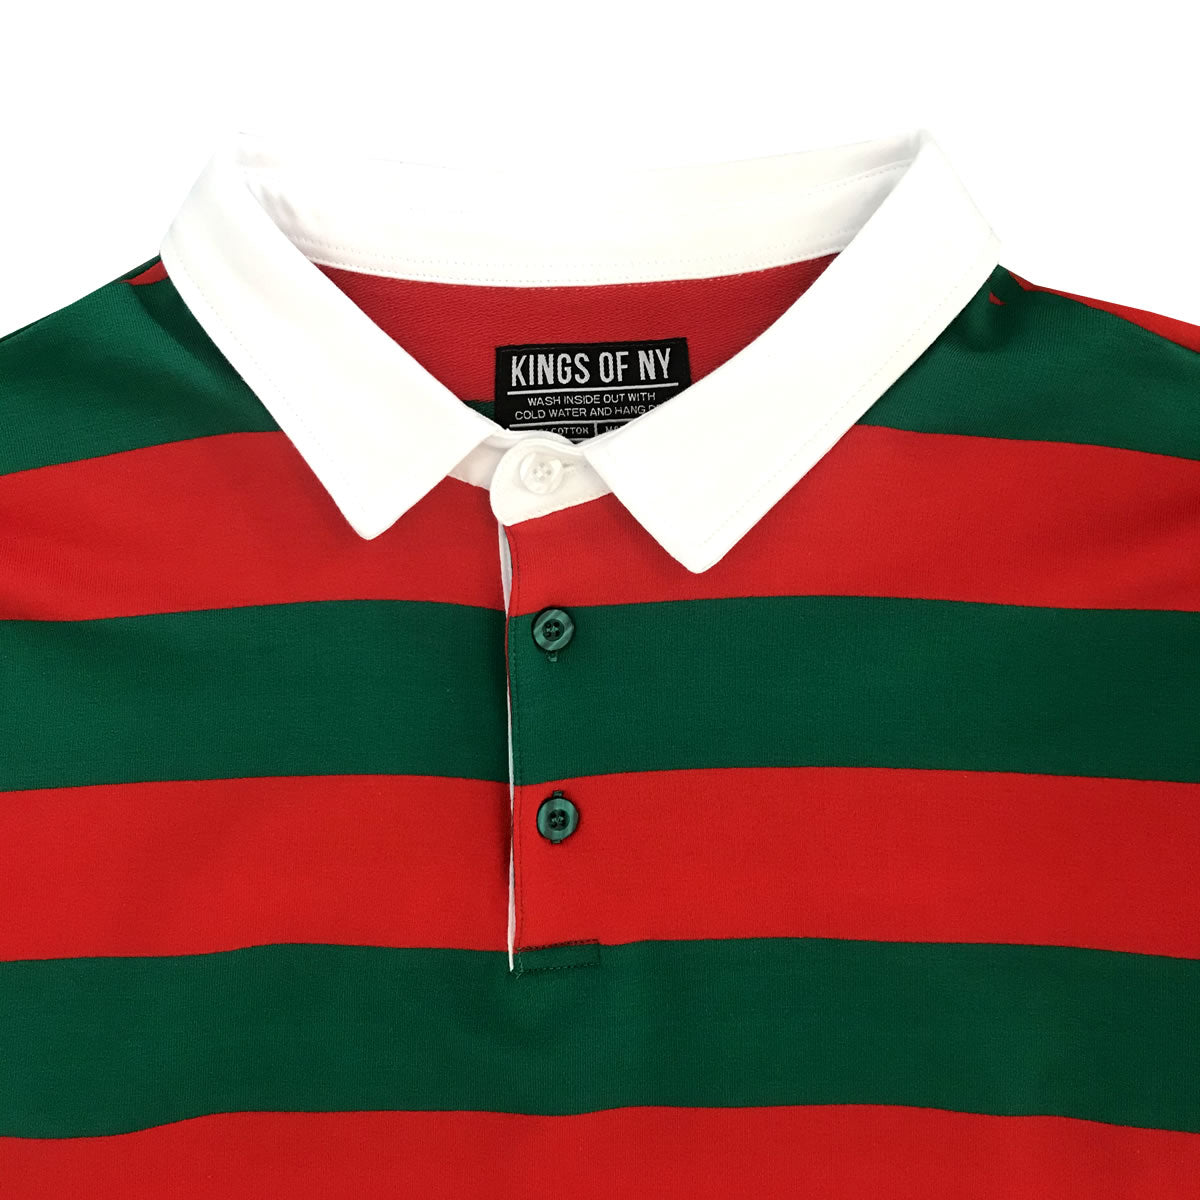 Green And Red Striped Mens Long Sleeve Rugby Shirt